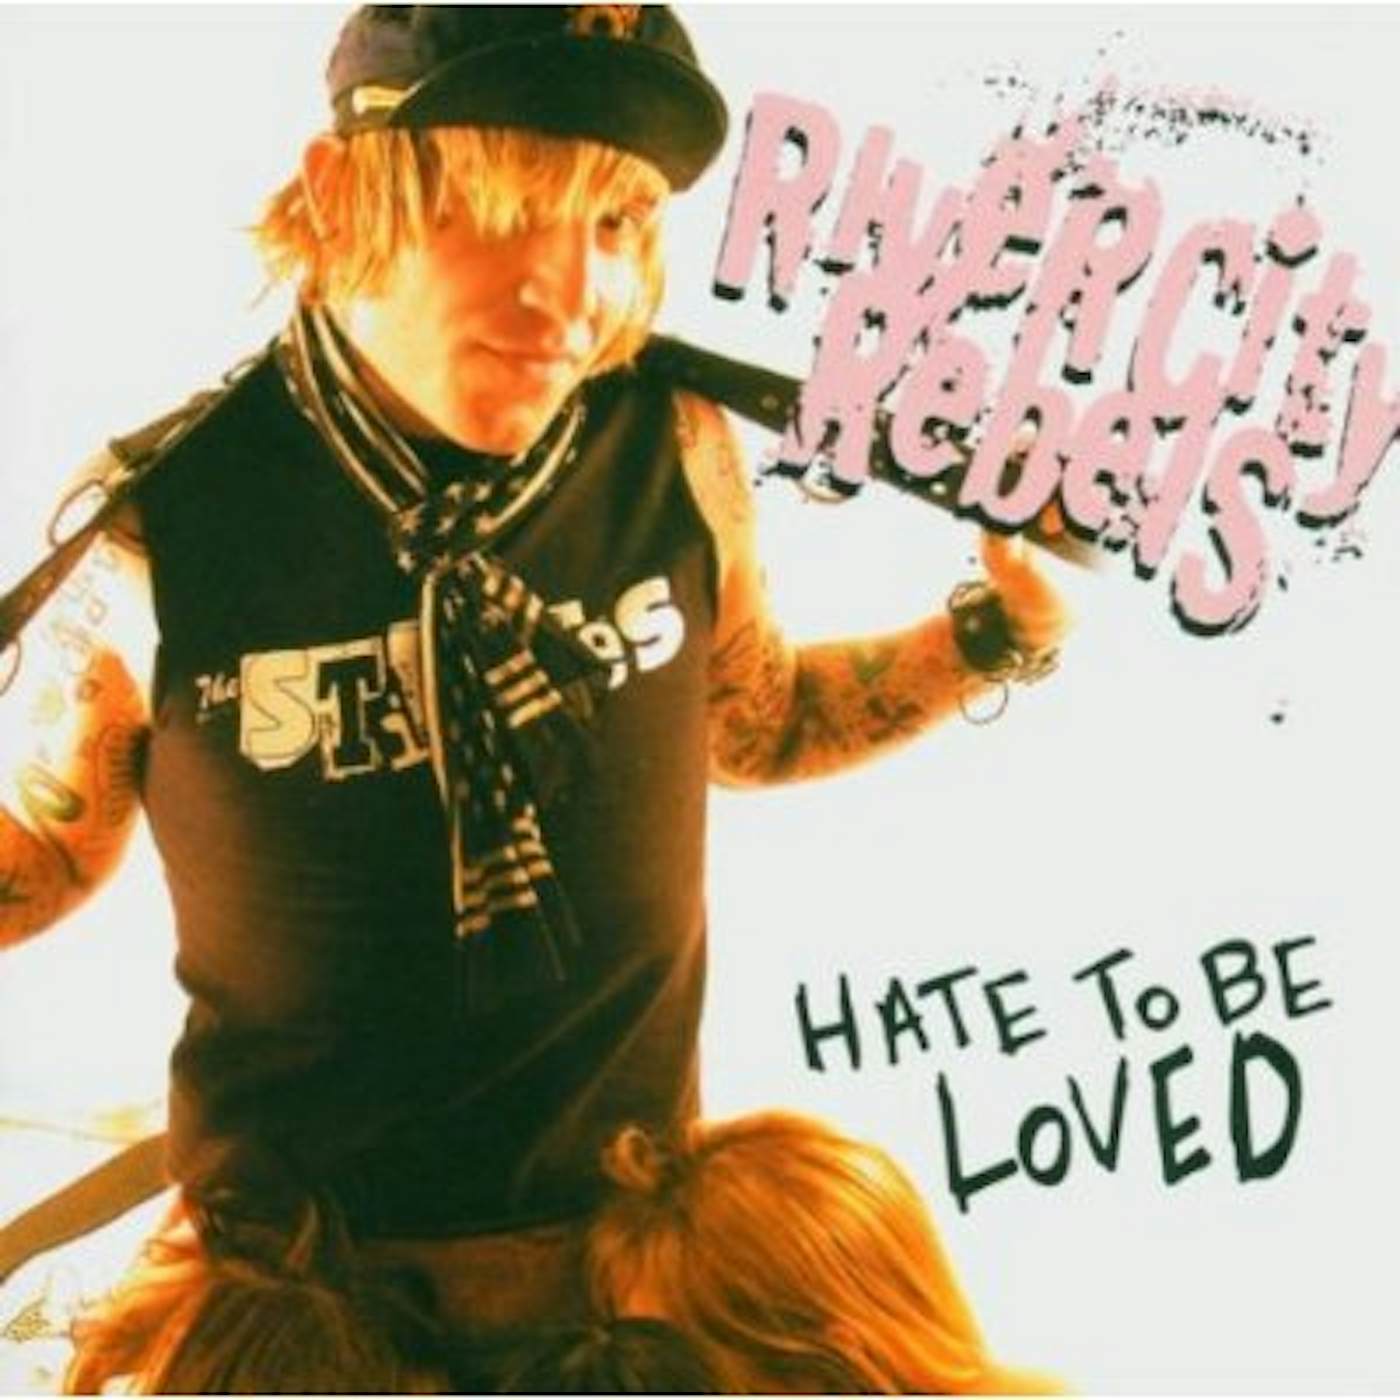 River City Rebels HATE TO BE LOVED CD